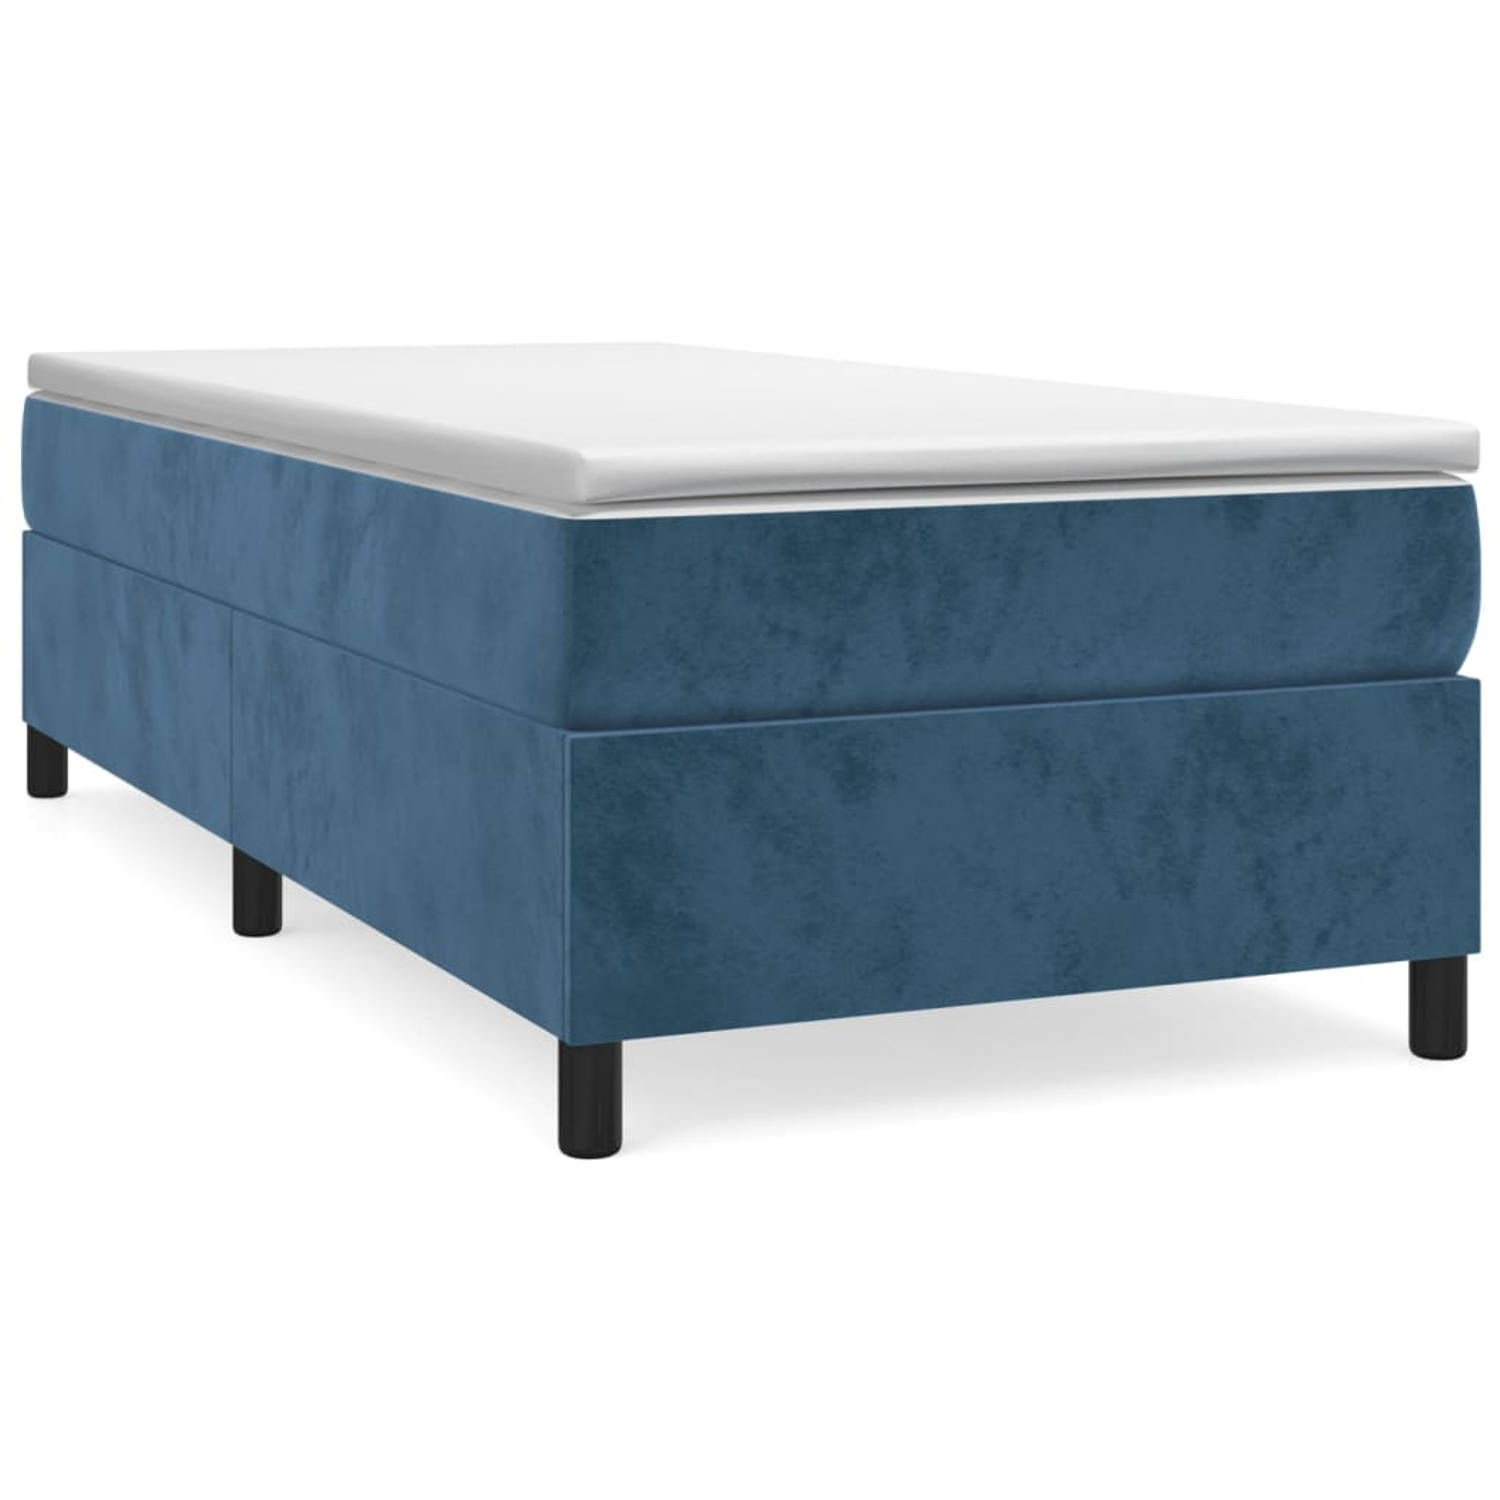 The Living Store Boxspringframe fluweel donkerblauw 90x190 cm - Bed